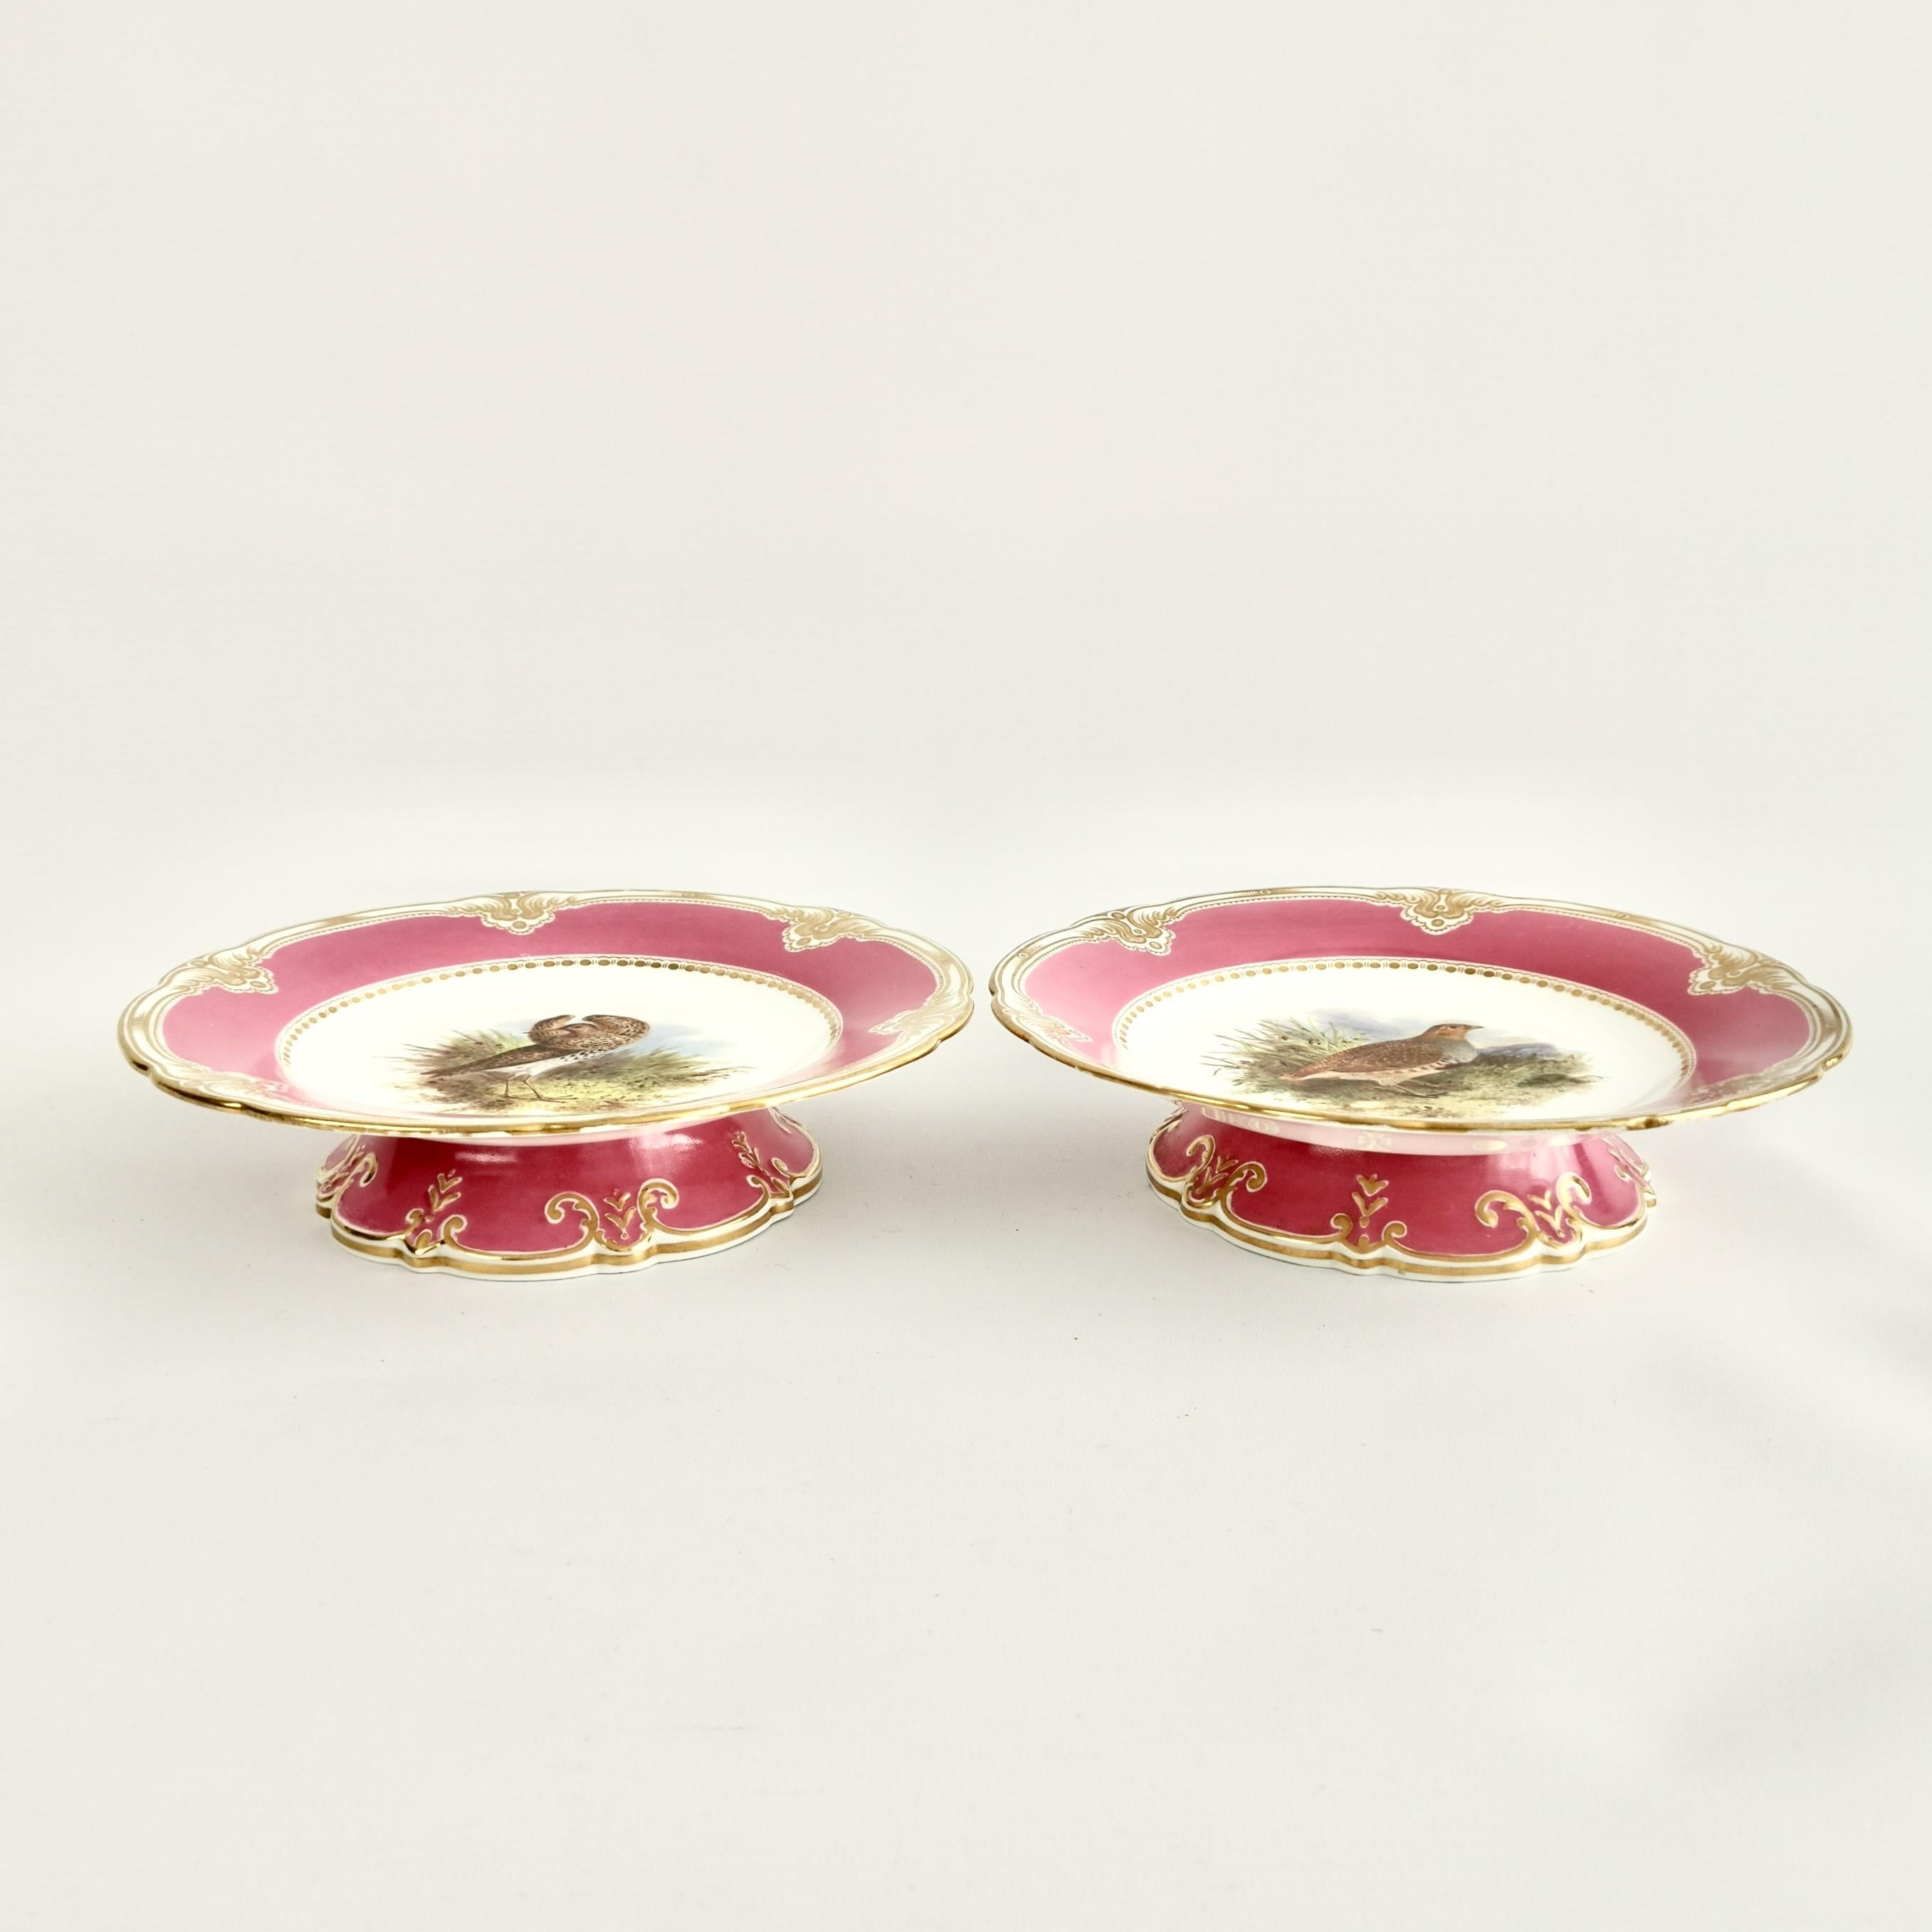 Victorian Royal Worcester Pair of Porcelain Comports, Pink with Named Birds, 1852-1862